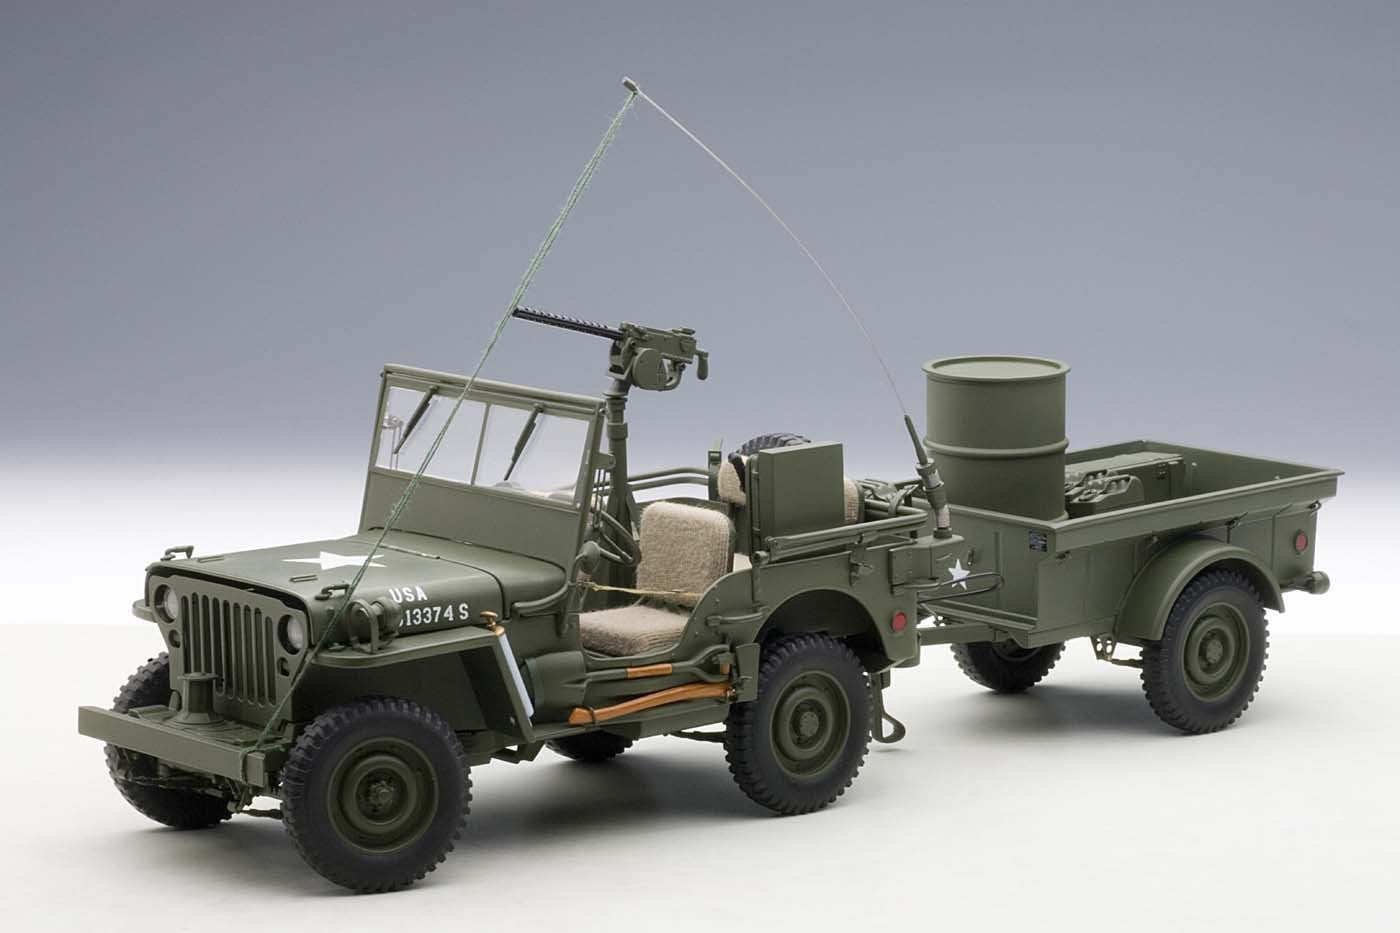 1:24 Scale Willys WW II Jeep Military Vehicle Diecast US Army Model Car Toy 